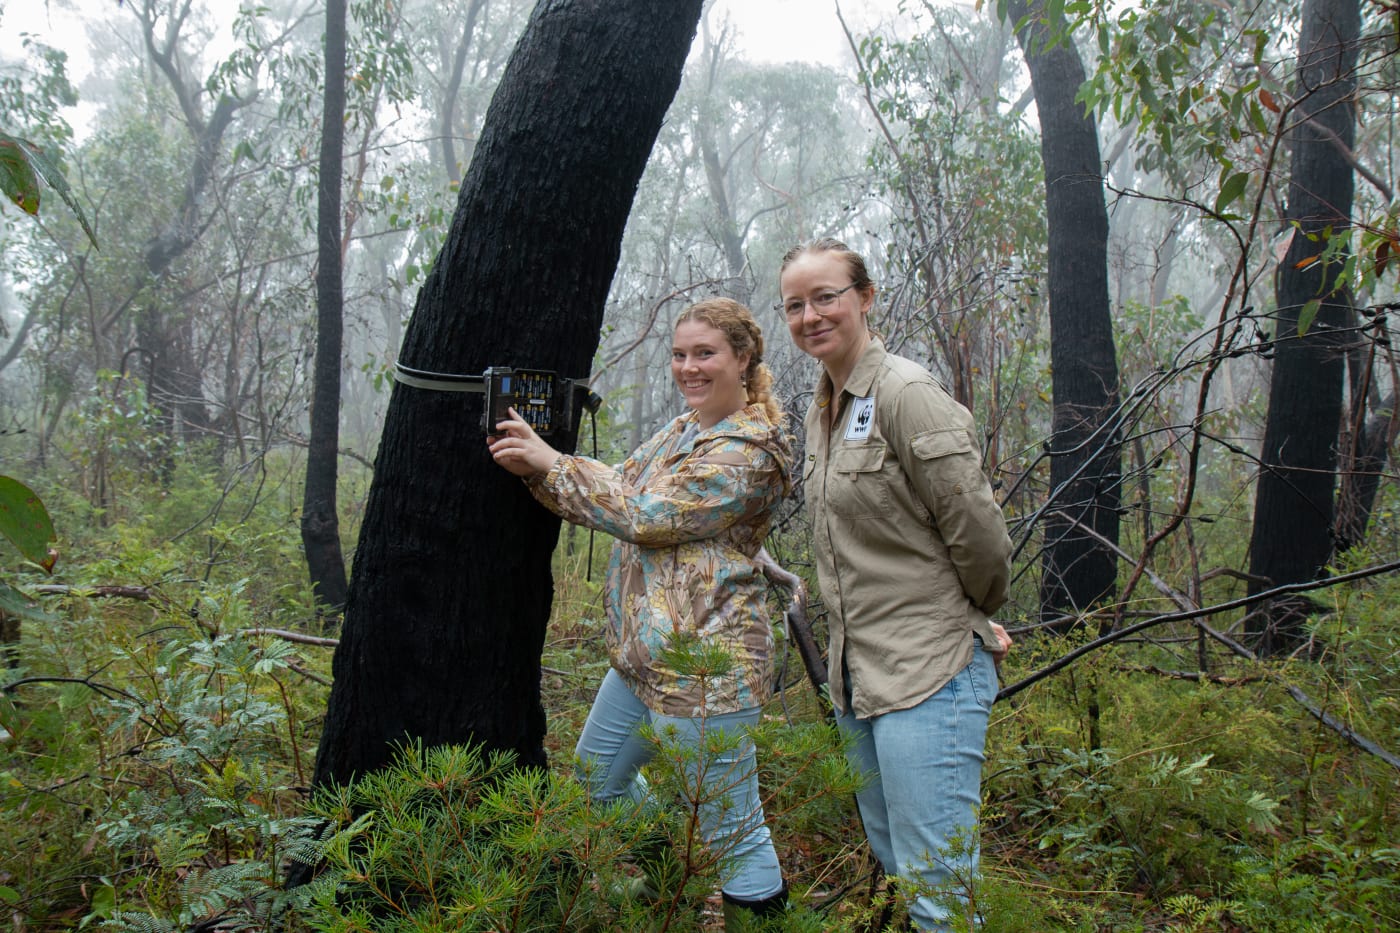 Melinda Kerr from the Blue Mountains World Heritage Institute (left) and Dr Emma Spencer from WWF-Australia (right) check a sensor camera in the Blue Mountains as part of the Eyes on Recovery project.

Eyes on Recovery is a large-scale sensor camera project. and a collaboration between WWF, Conservation International, and local land managers and research organisations. Google-powered AI technology has been trained to identify Australian animals in photos to track the recovery of threatened species following the 2019-20 bushfires.